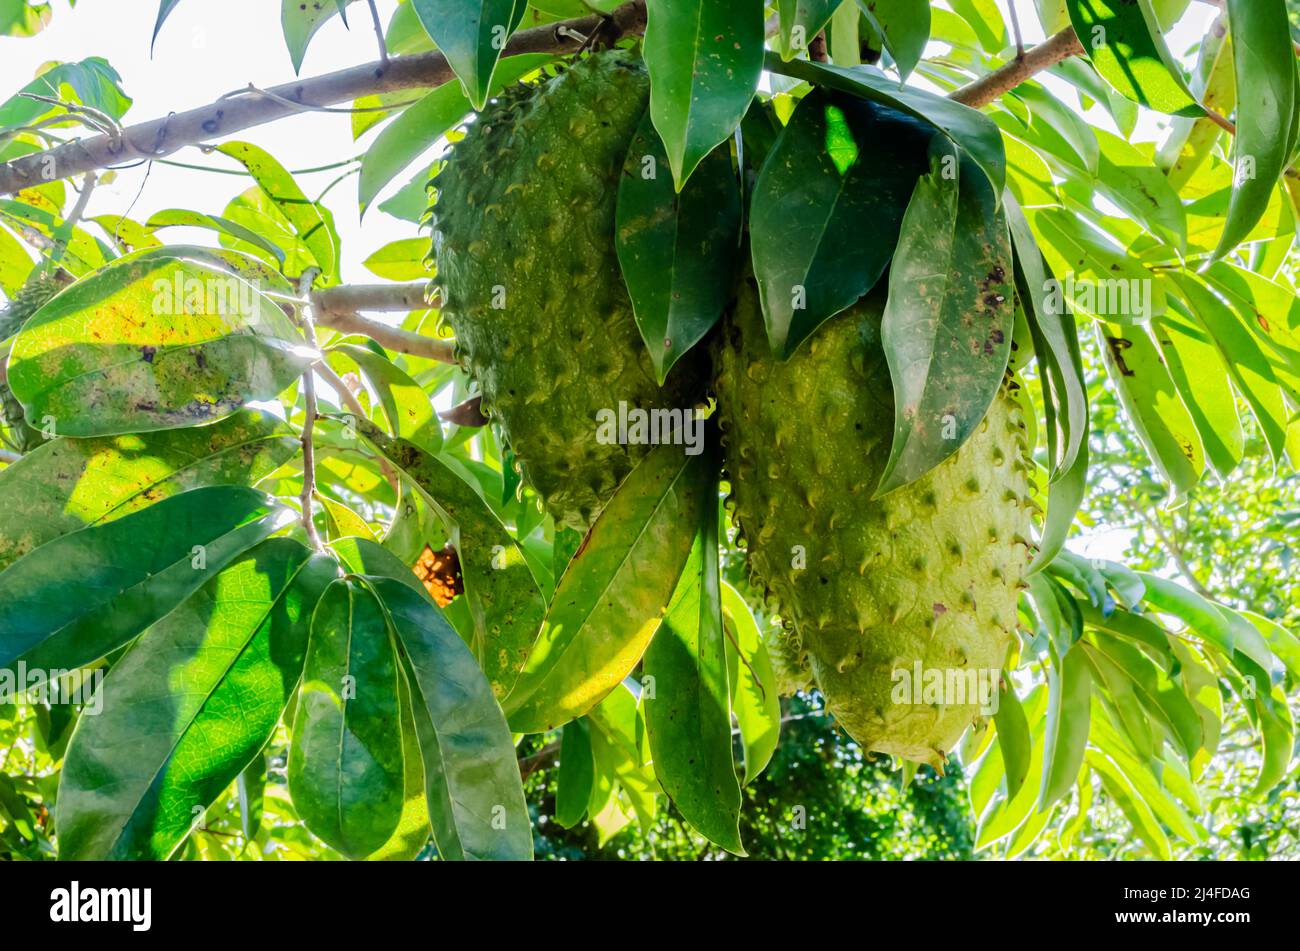 A soursop tree lit with bright sunlight has two mature fruits suspending from a branch among green leaves of the plant. Stock Photo